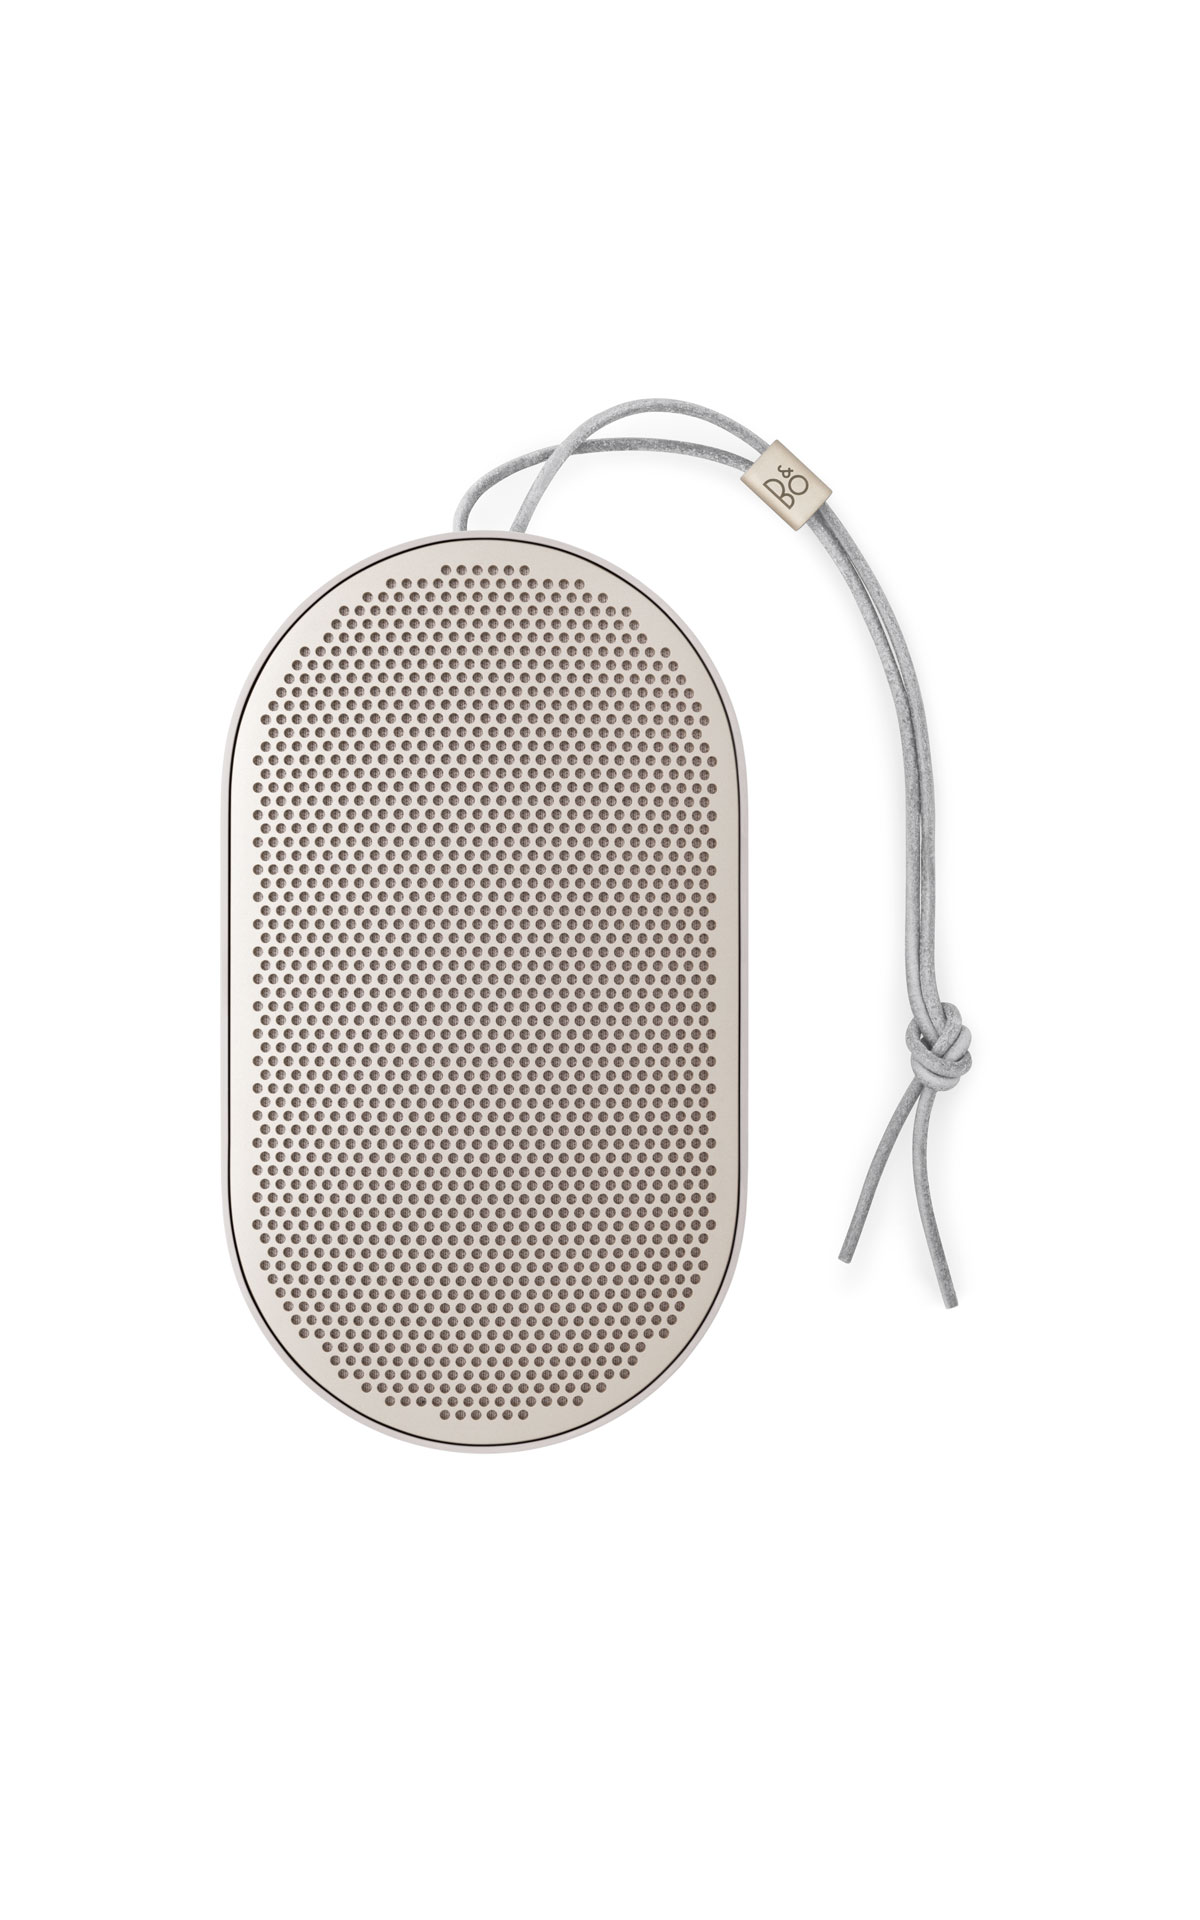 Bang & Olufsen Beoplay P2 0145 from Bicester Village